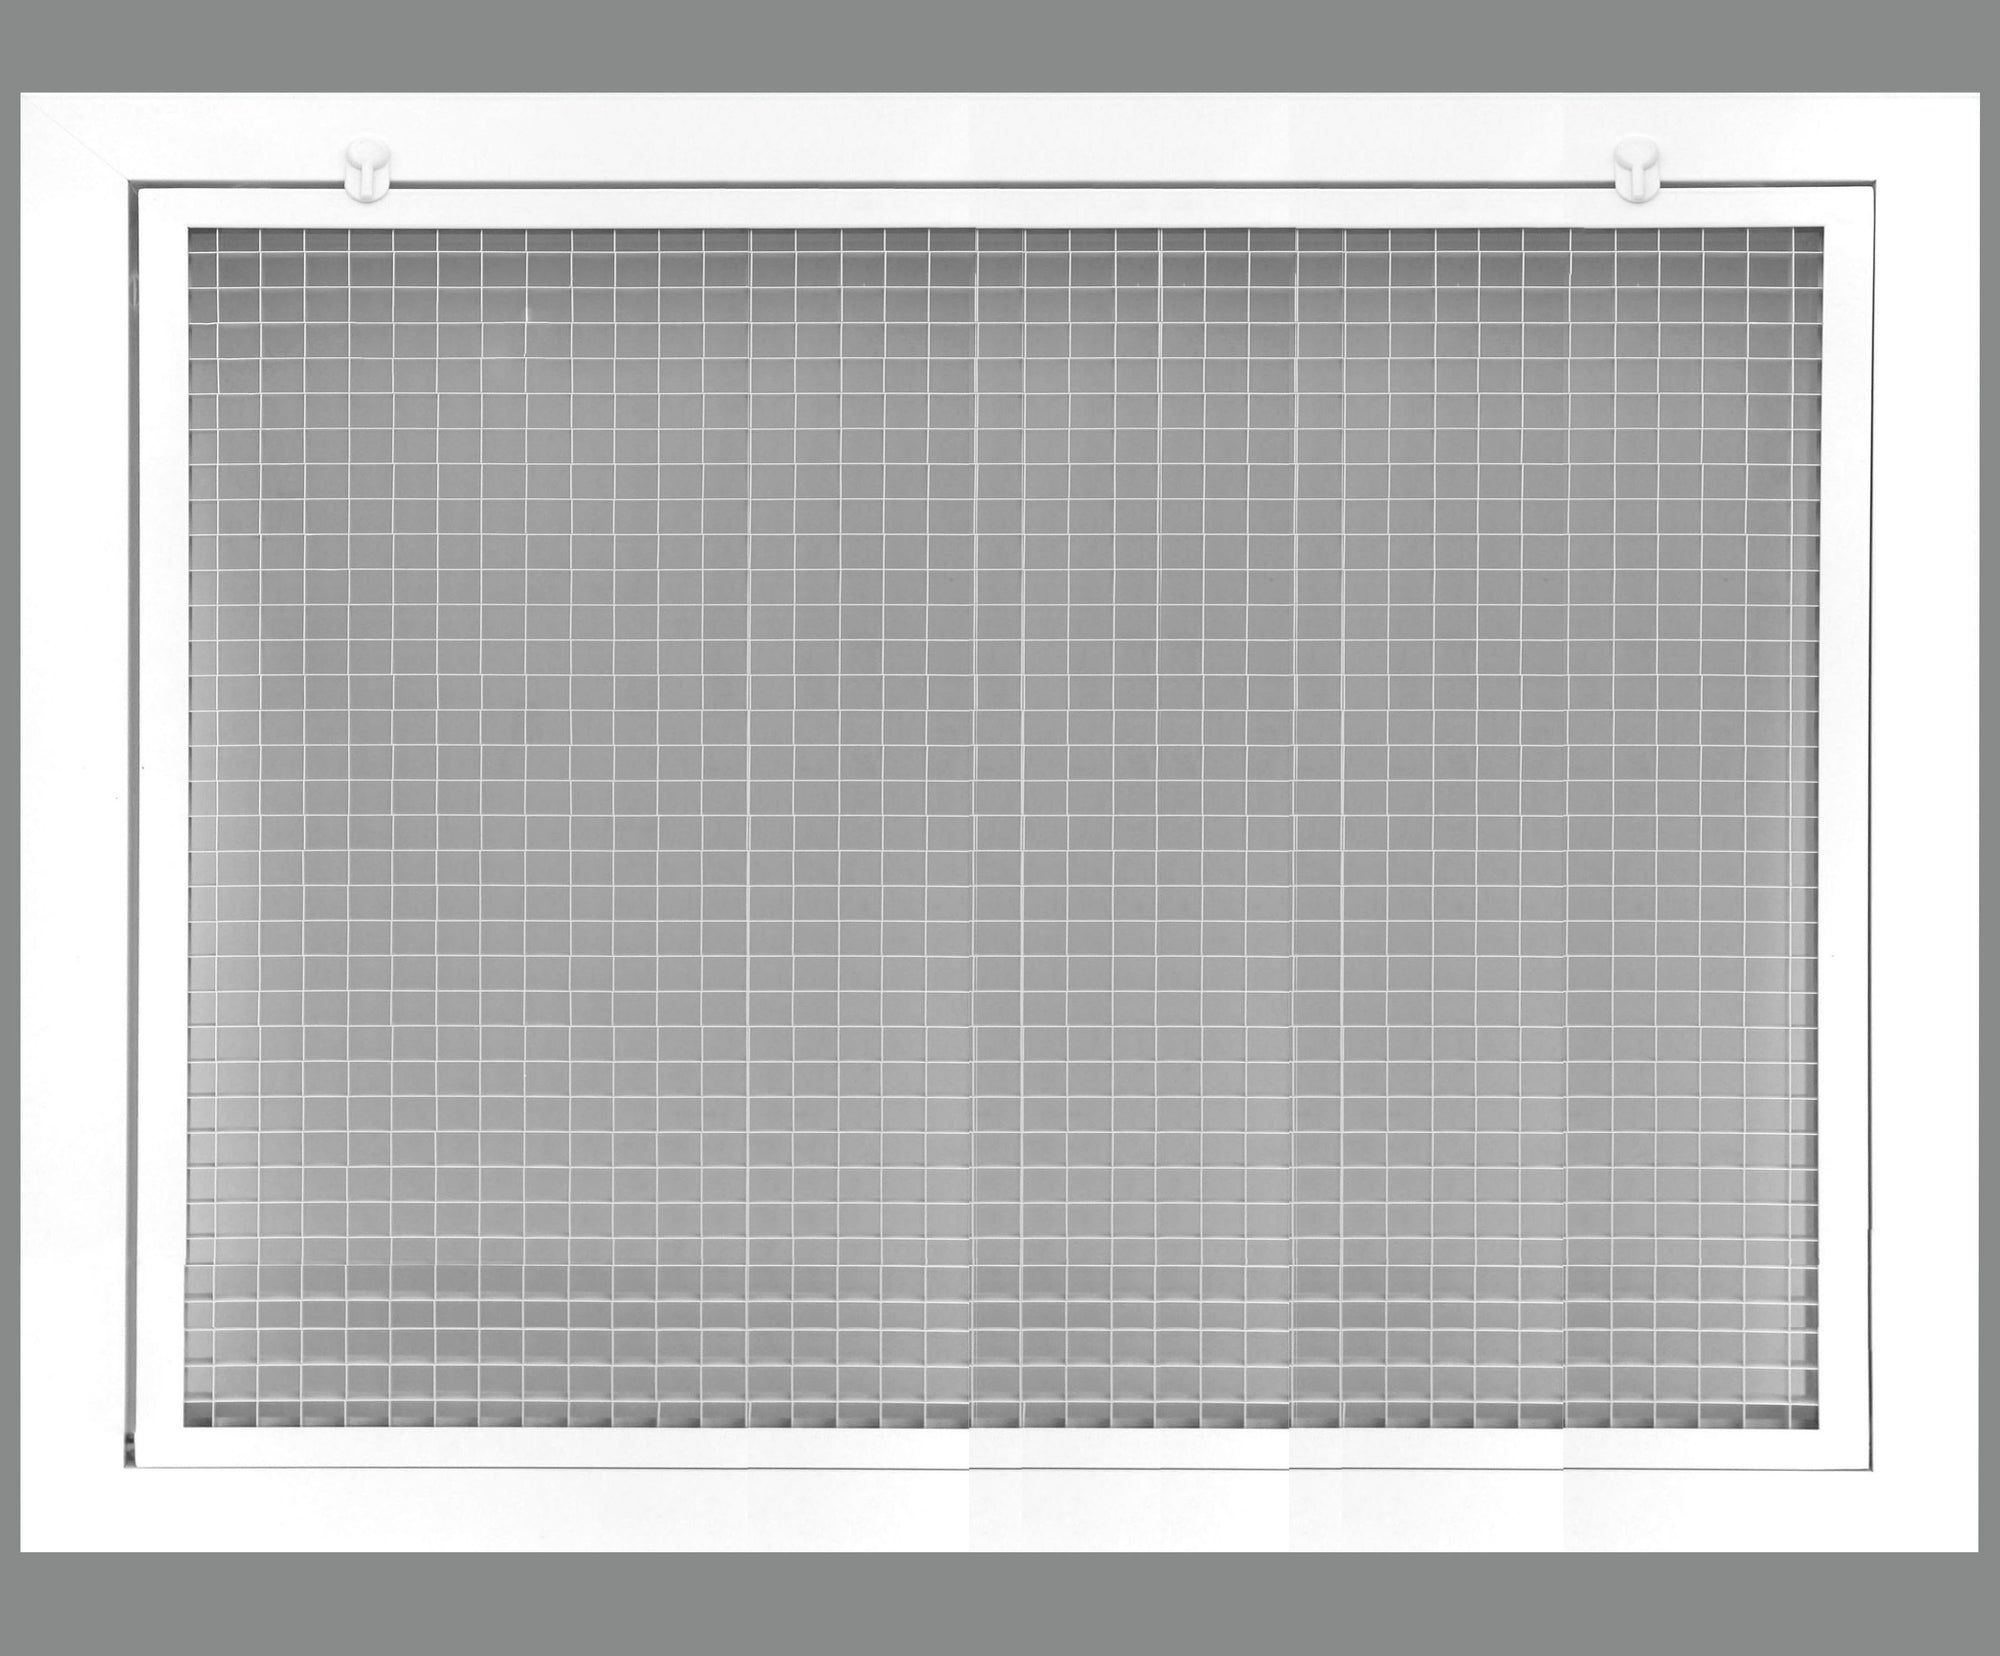 18" x 14" Cube Core Eggcrate Return Air Filter Grille for 1" Filter